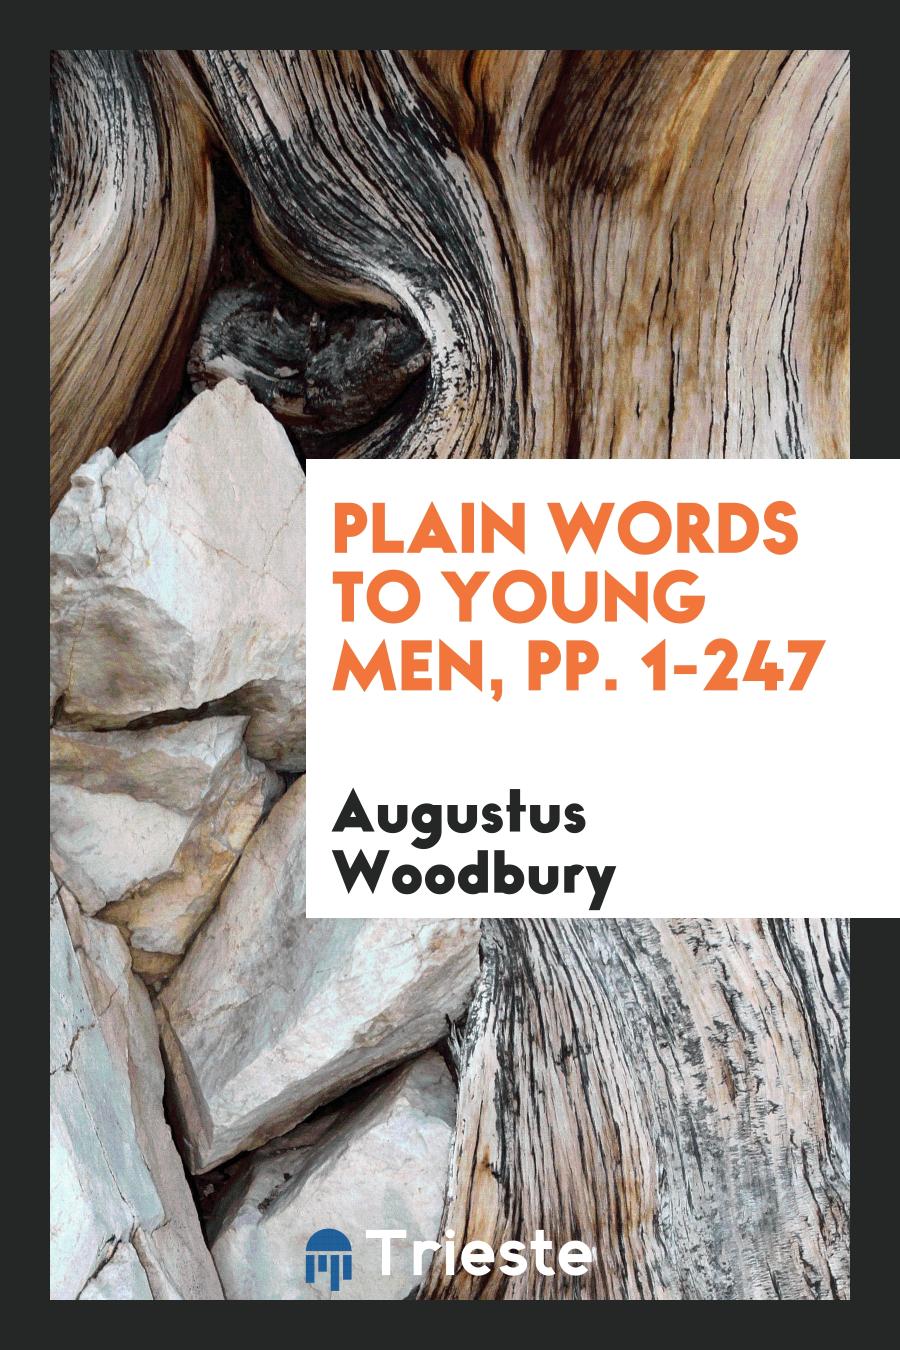 Plain Words to Young Men, pp. 1-247